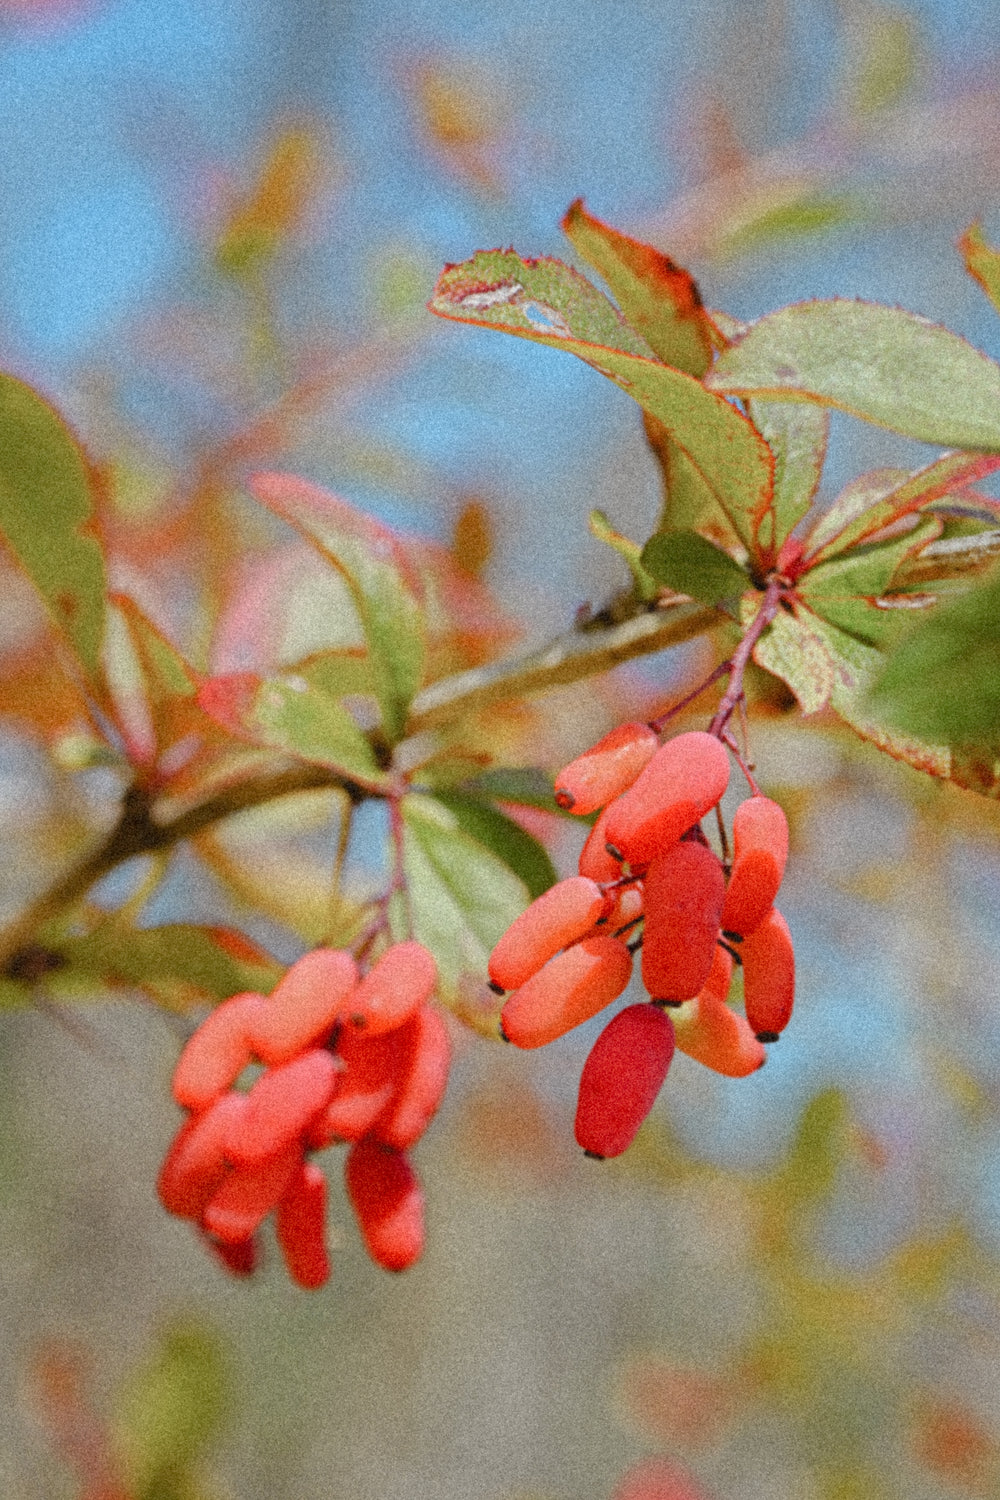 From Balancing Blood Sugar to Perimenopause Relief: 6 Reasons to Take a Berberine Supplement